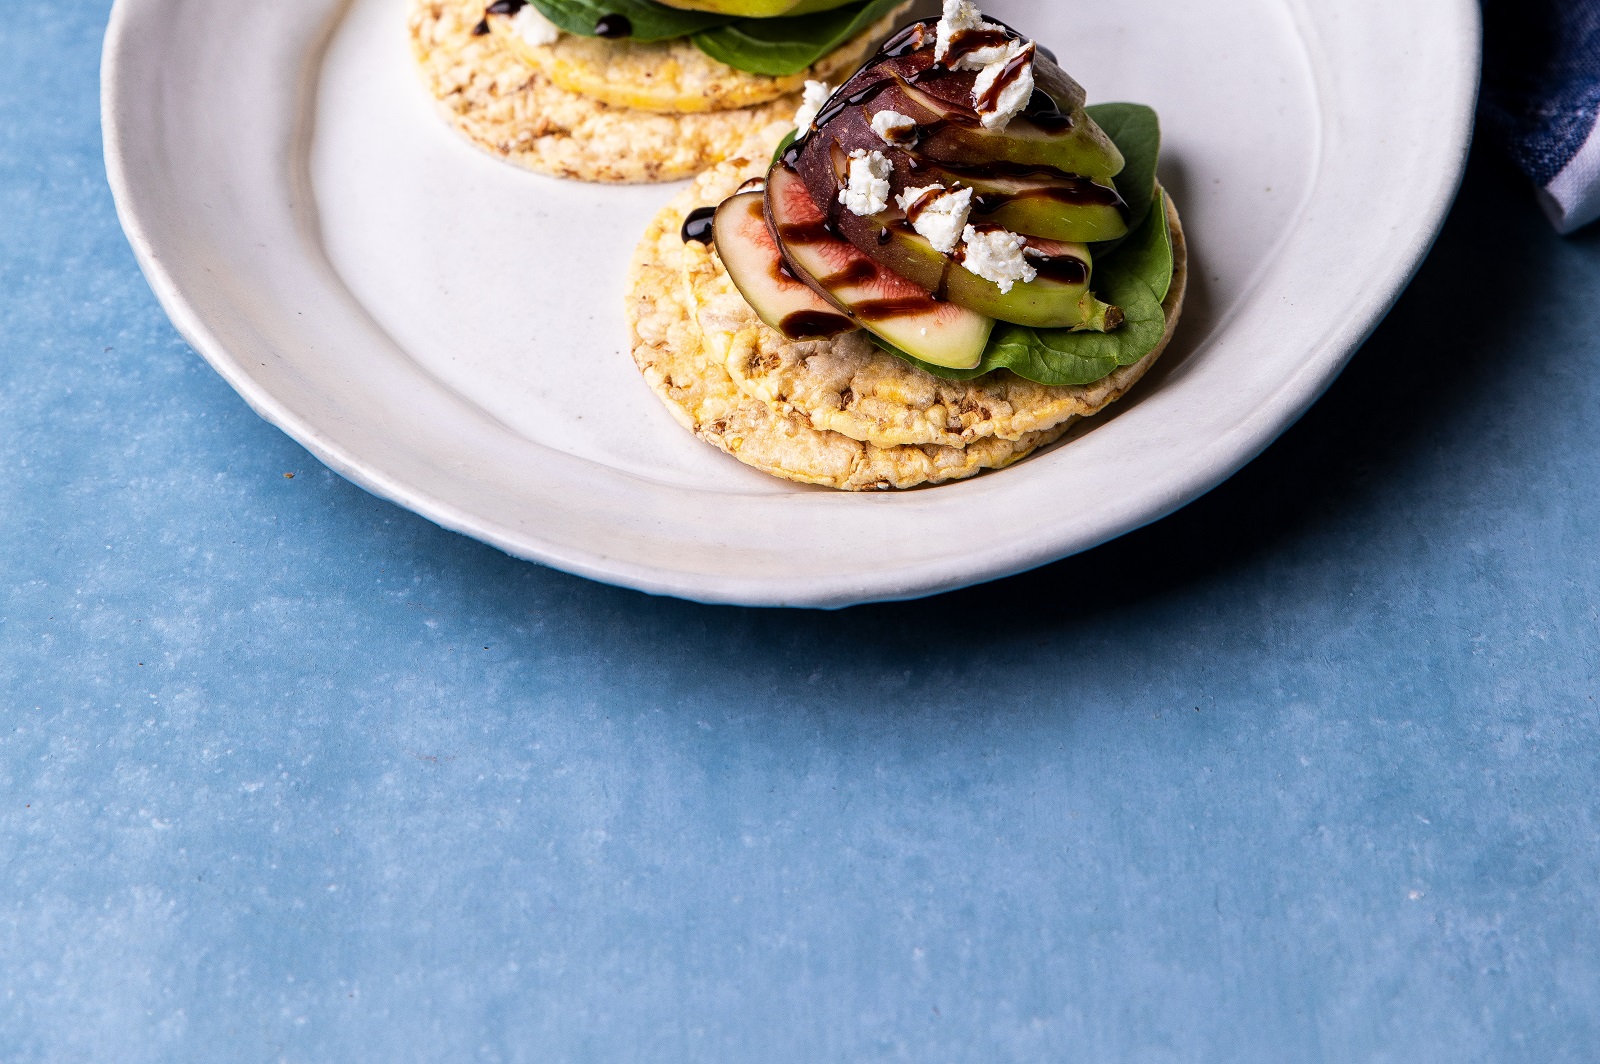 Baby Spinach, Fig, Goats Curd & Balsamic Glaze on CORN THINS slices